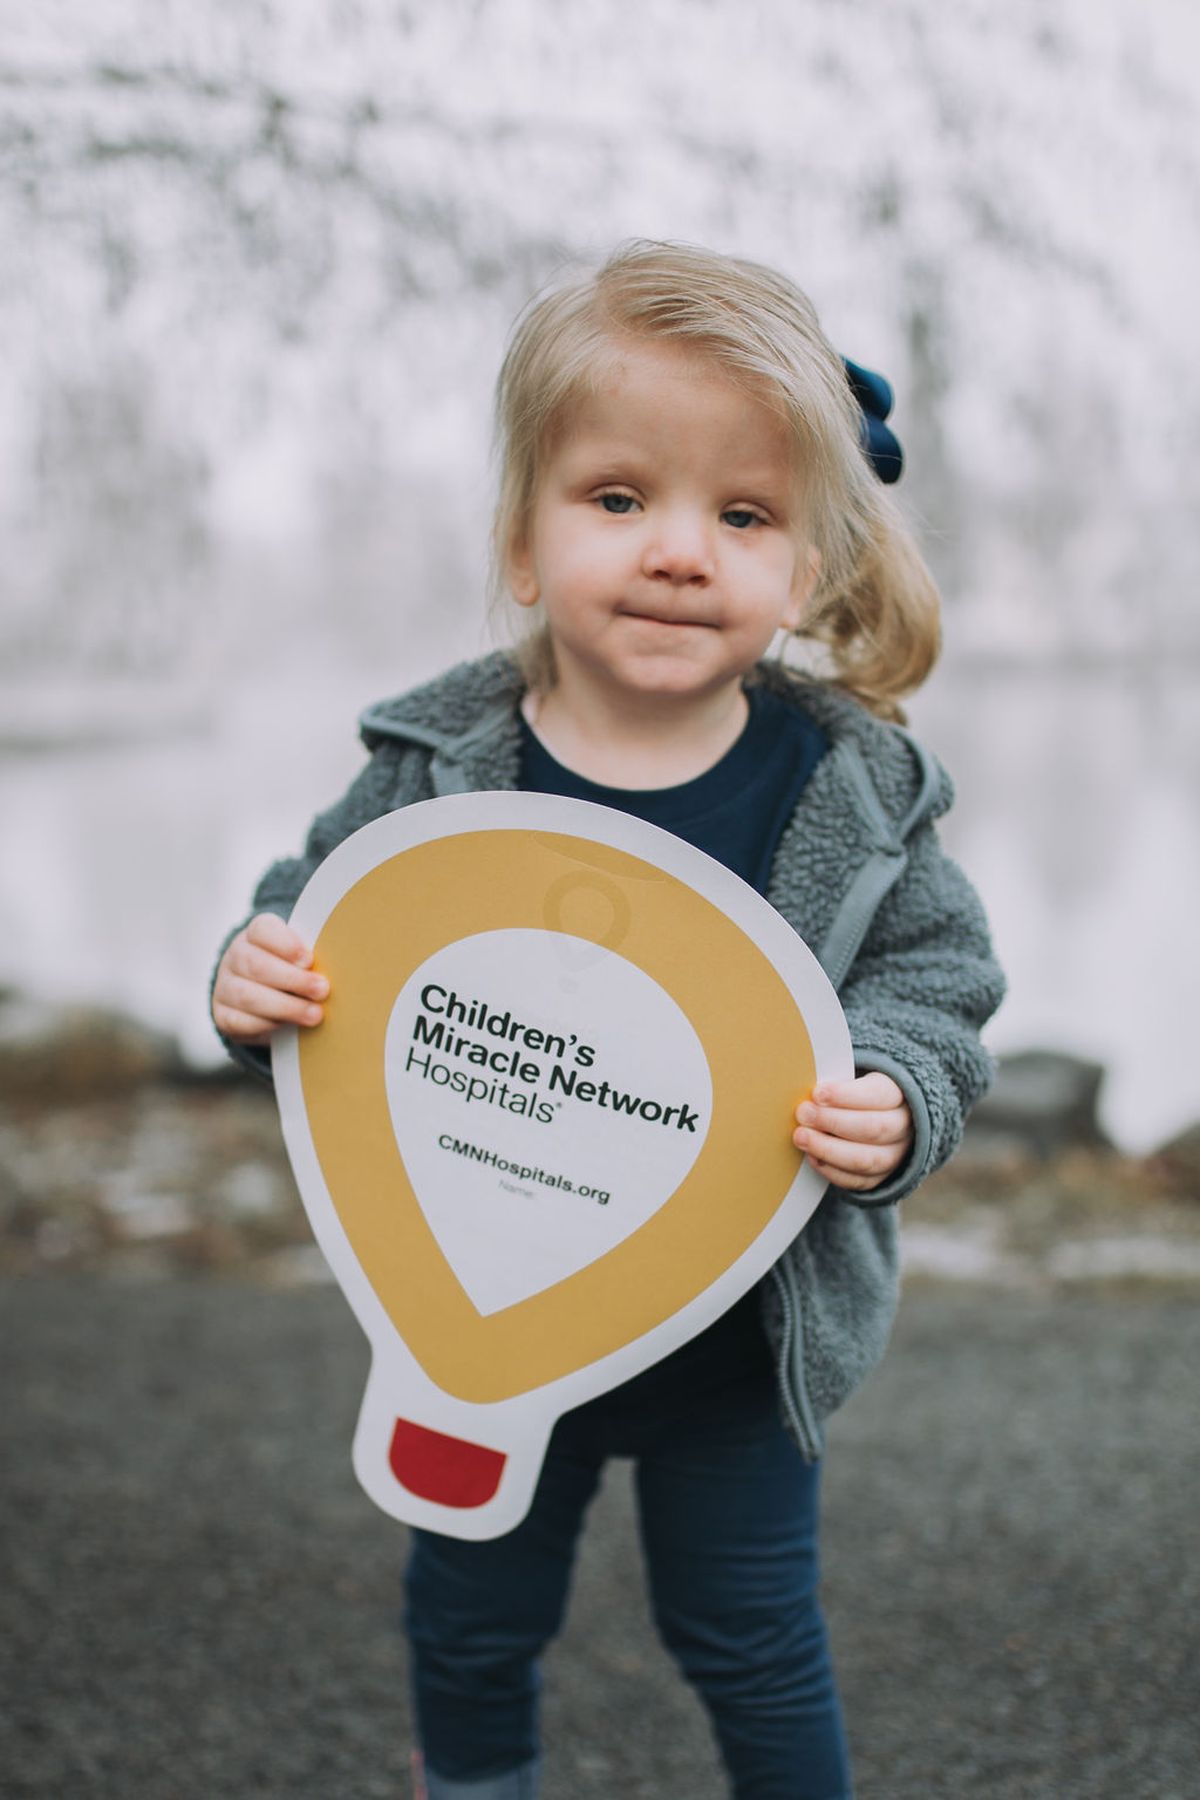 Journey Burkhart, 2, is a Spokane resident born with STAR syndrome, a rare genetic disease. This May, she’s featured in the local Costco campaign for Children’s Miracle Network Hospitals benefiting Sacred Heart Children’s Hospital.  (Mica Sansaver)